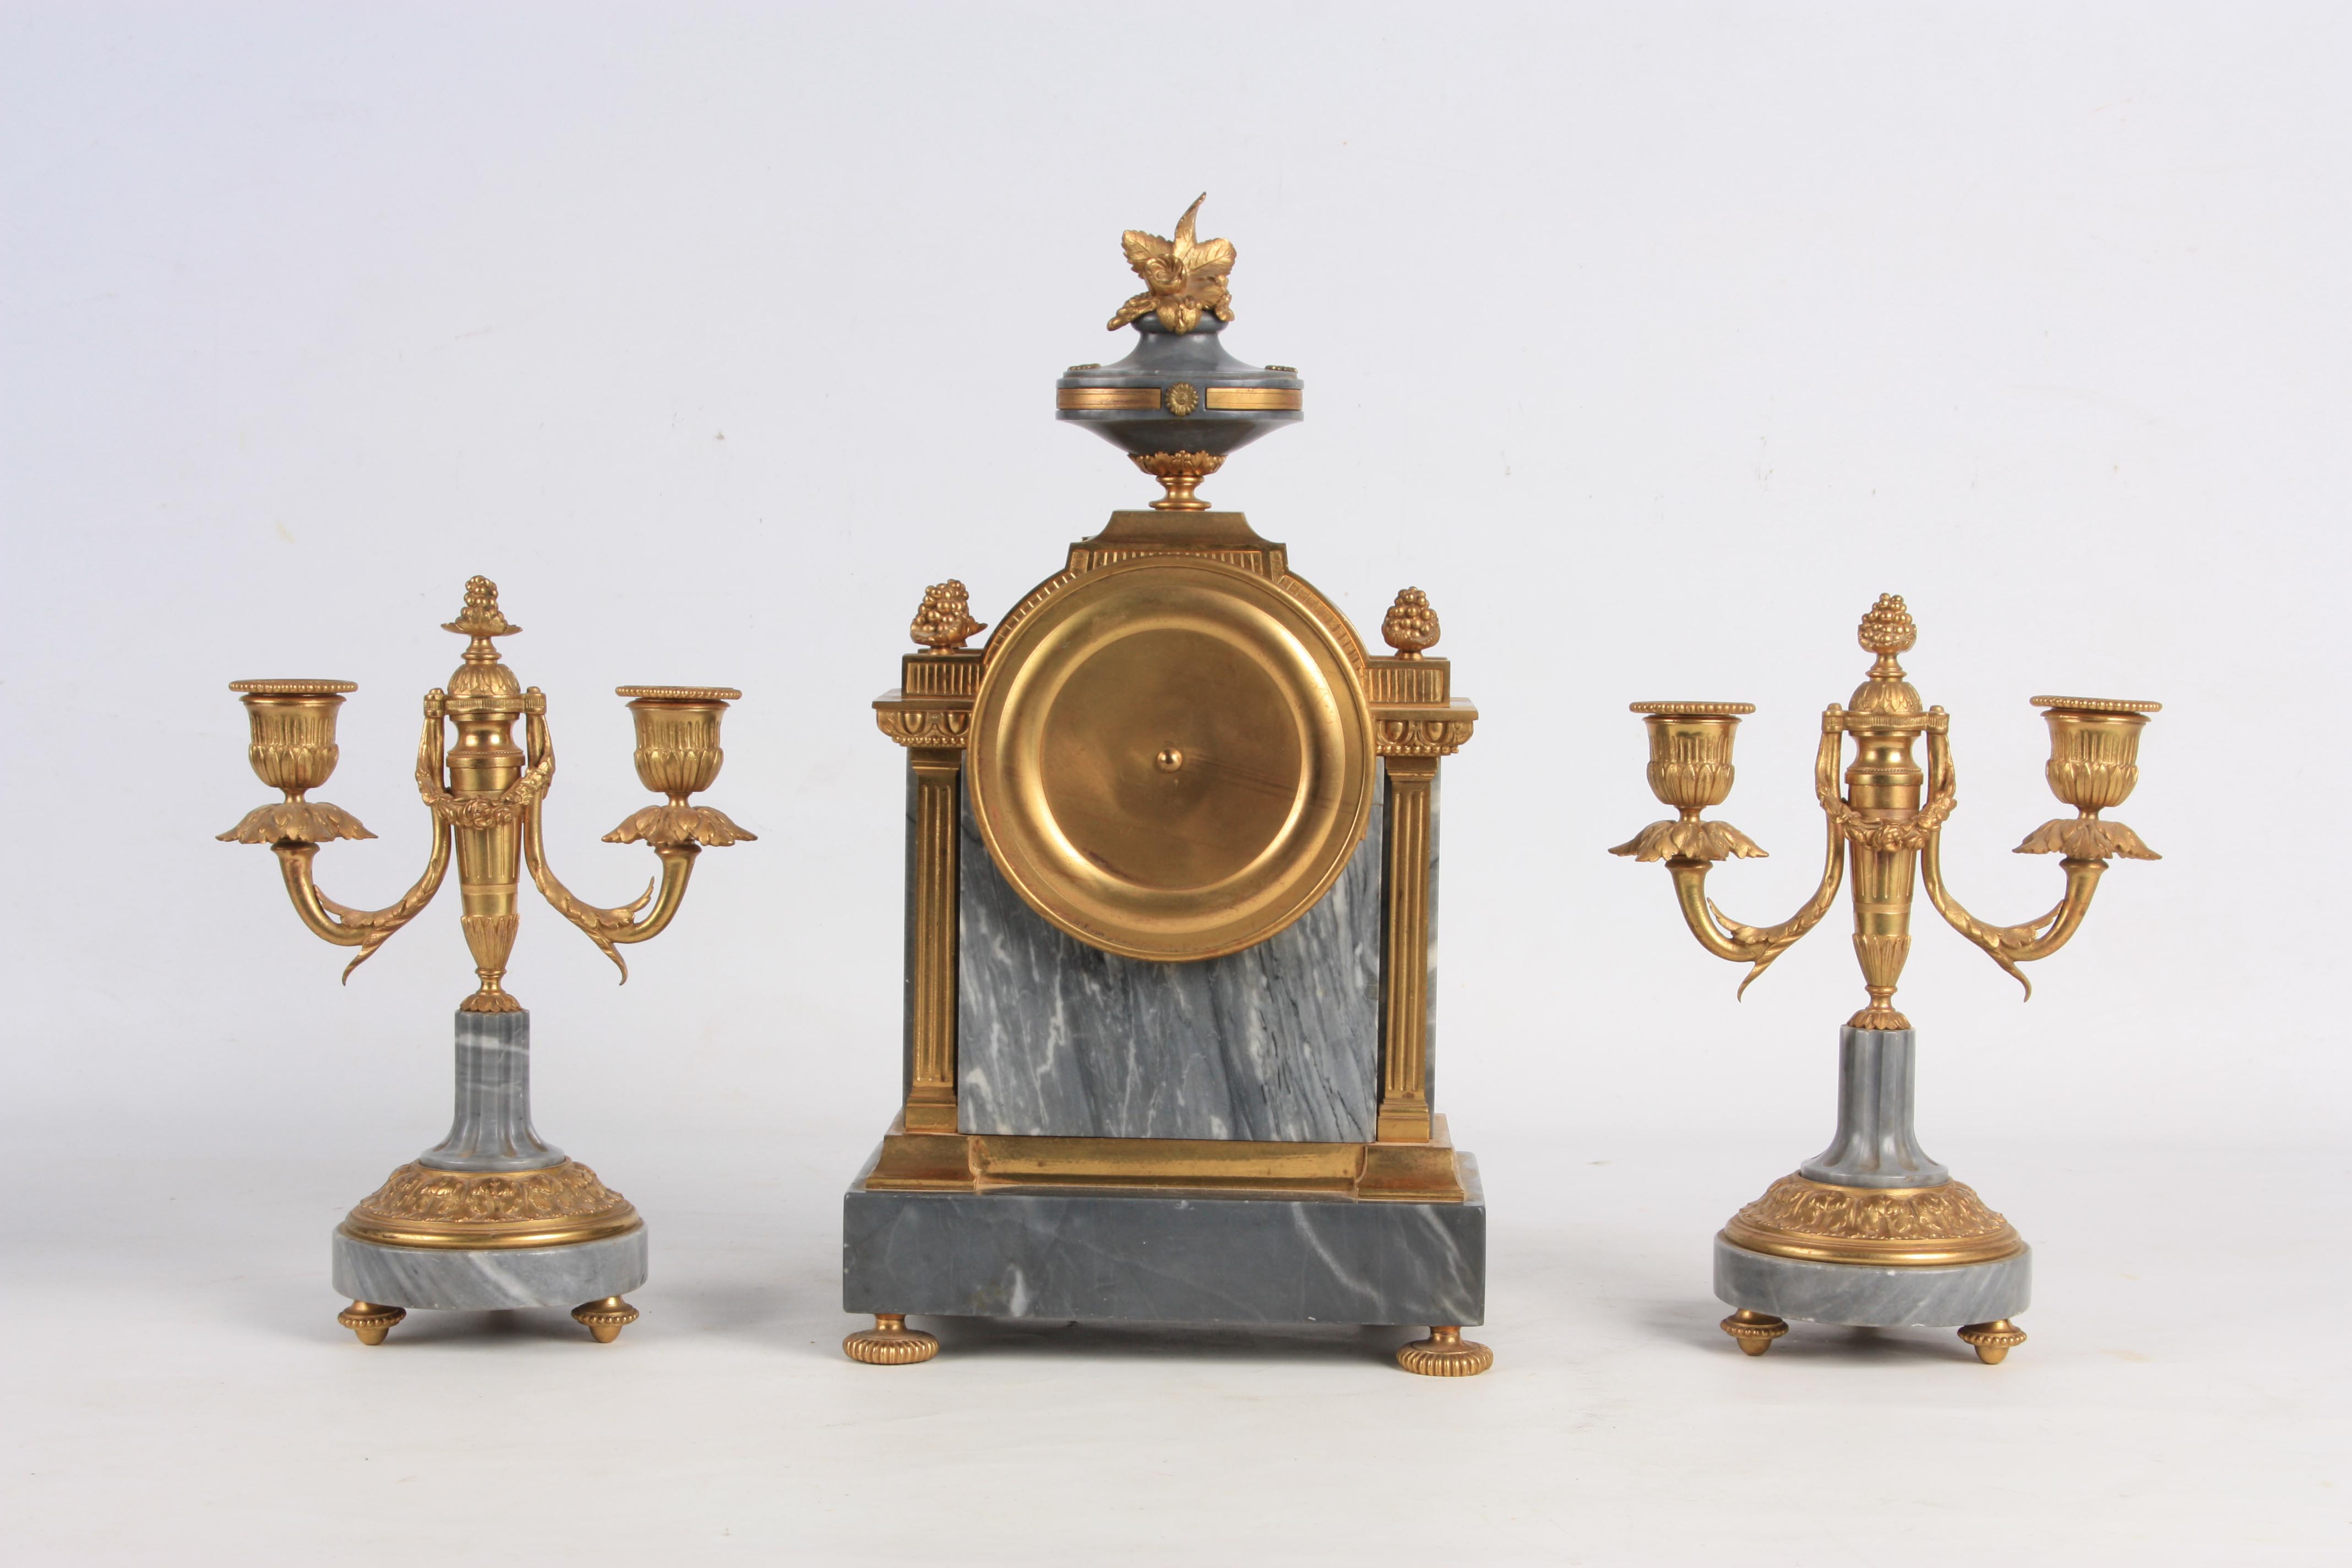 LEMERLE-CHARPENTIER & CIE, PARIS A MID 19TH CENTURY FRENCH MARBLE AND ORMOLU CLOCK GARNITURE the - Image 9 of 14